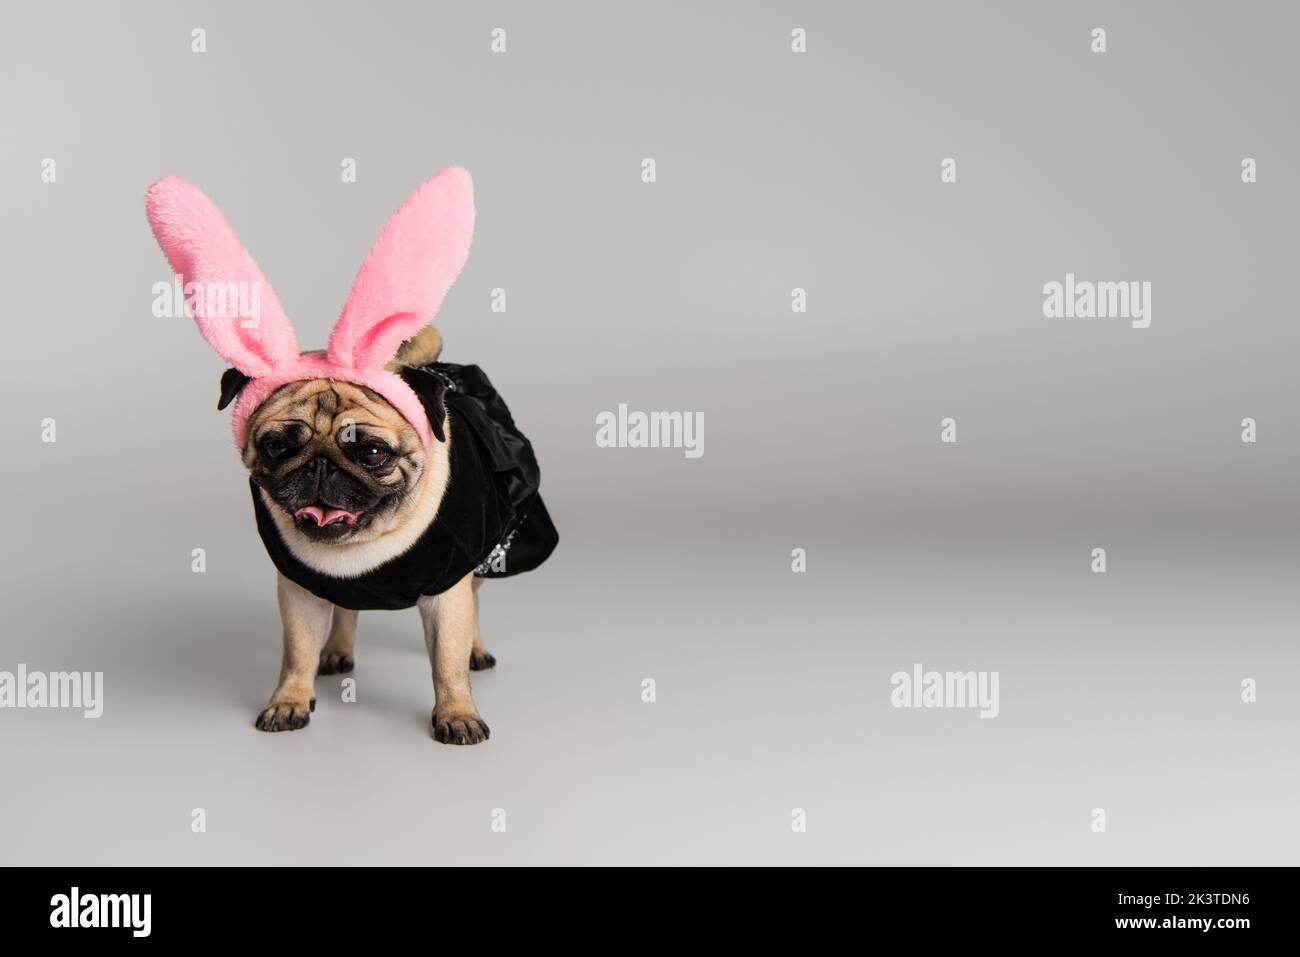 cute pug dog in headband with pink bunny ears and pet clothes standing on grey background,stock image Stock Photo